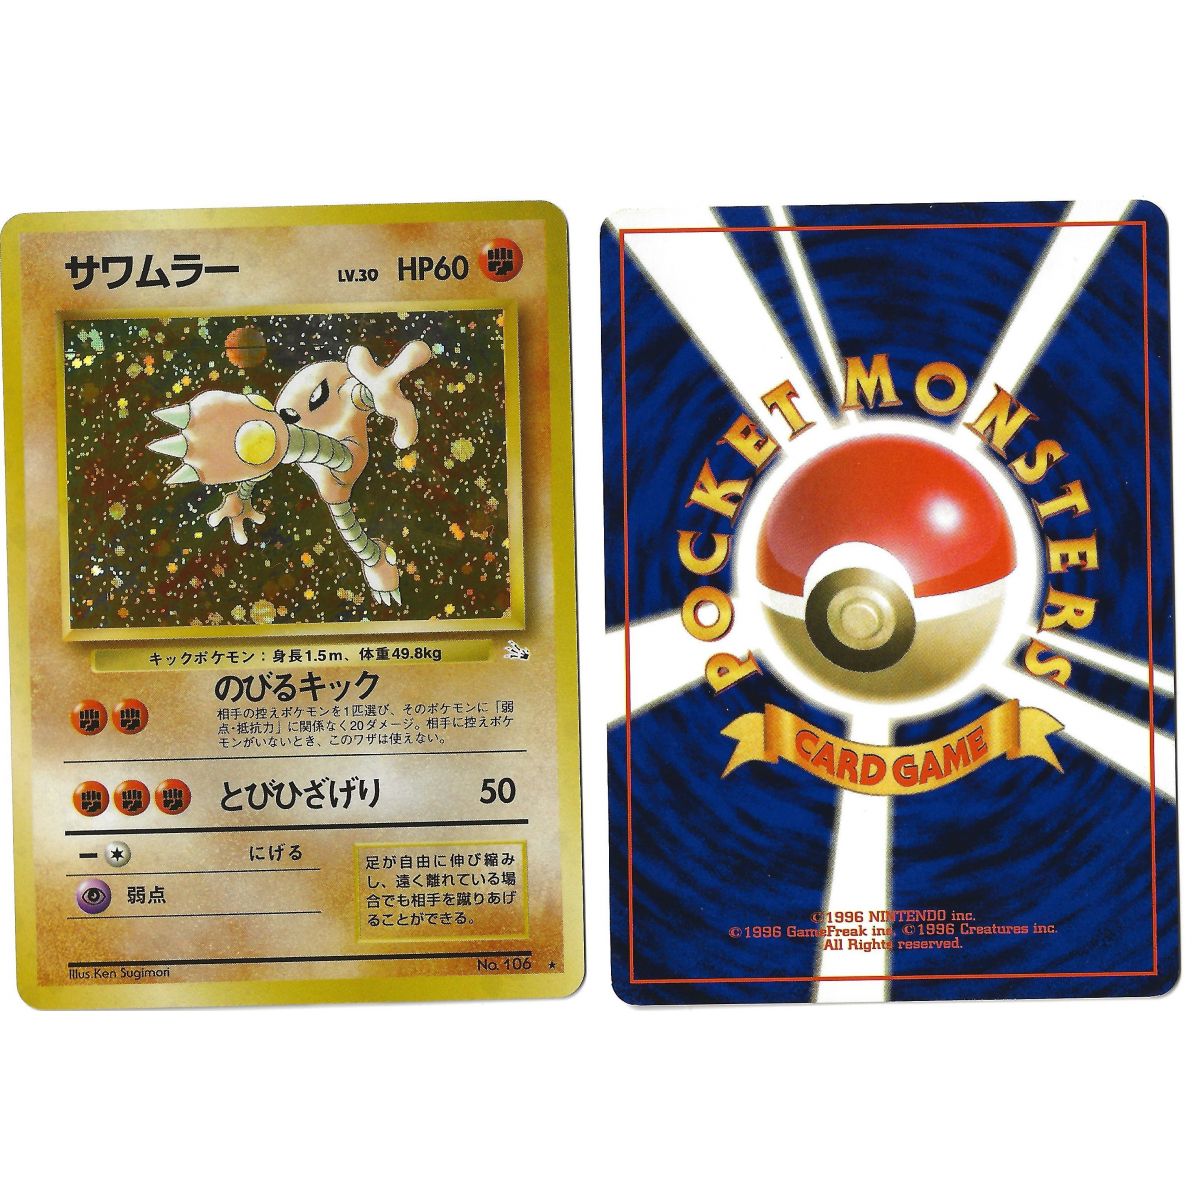 Hitmonlee (1) No.106 Mystery of the Fossils FO Holo Unlimited Japonais Voir Scan